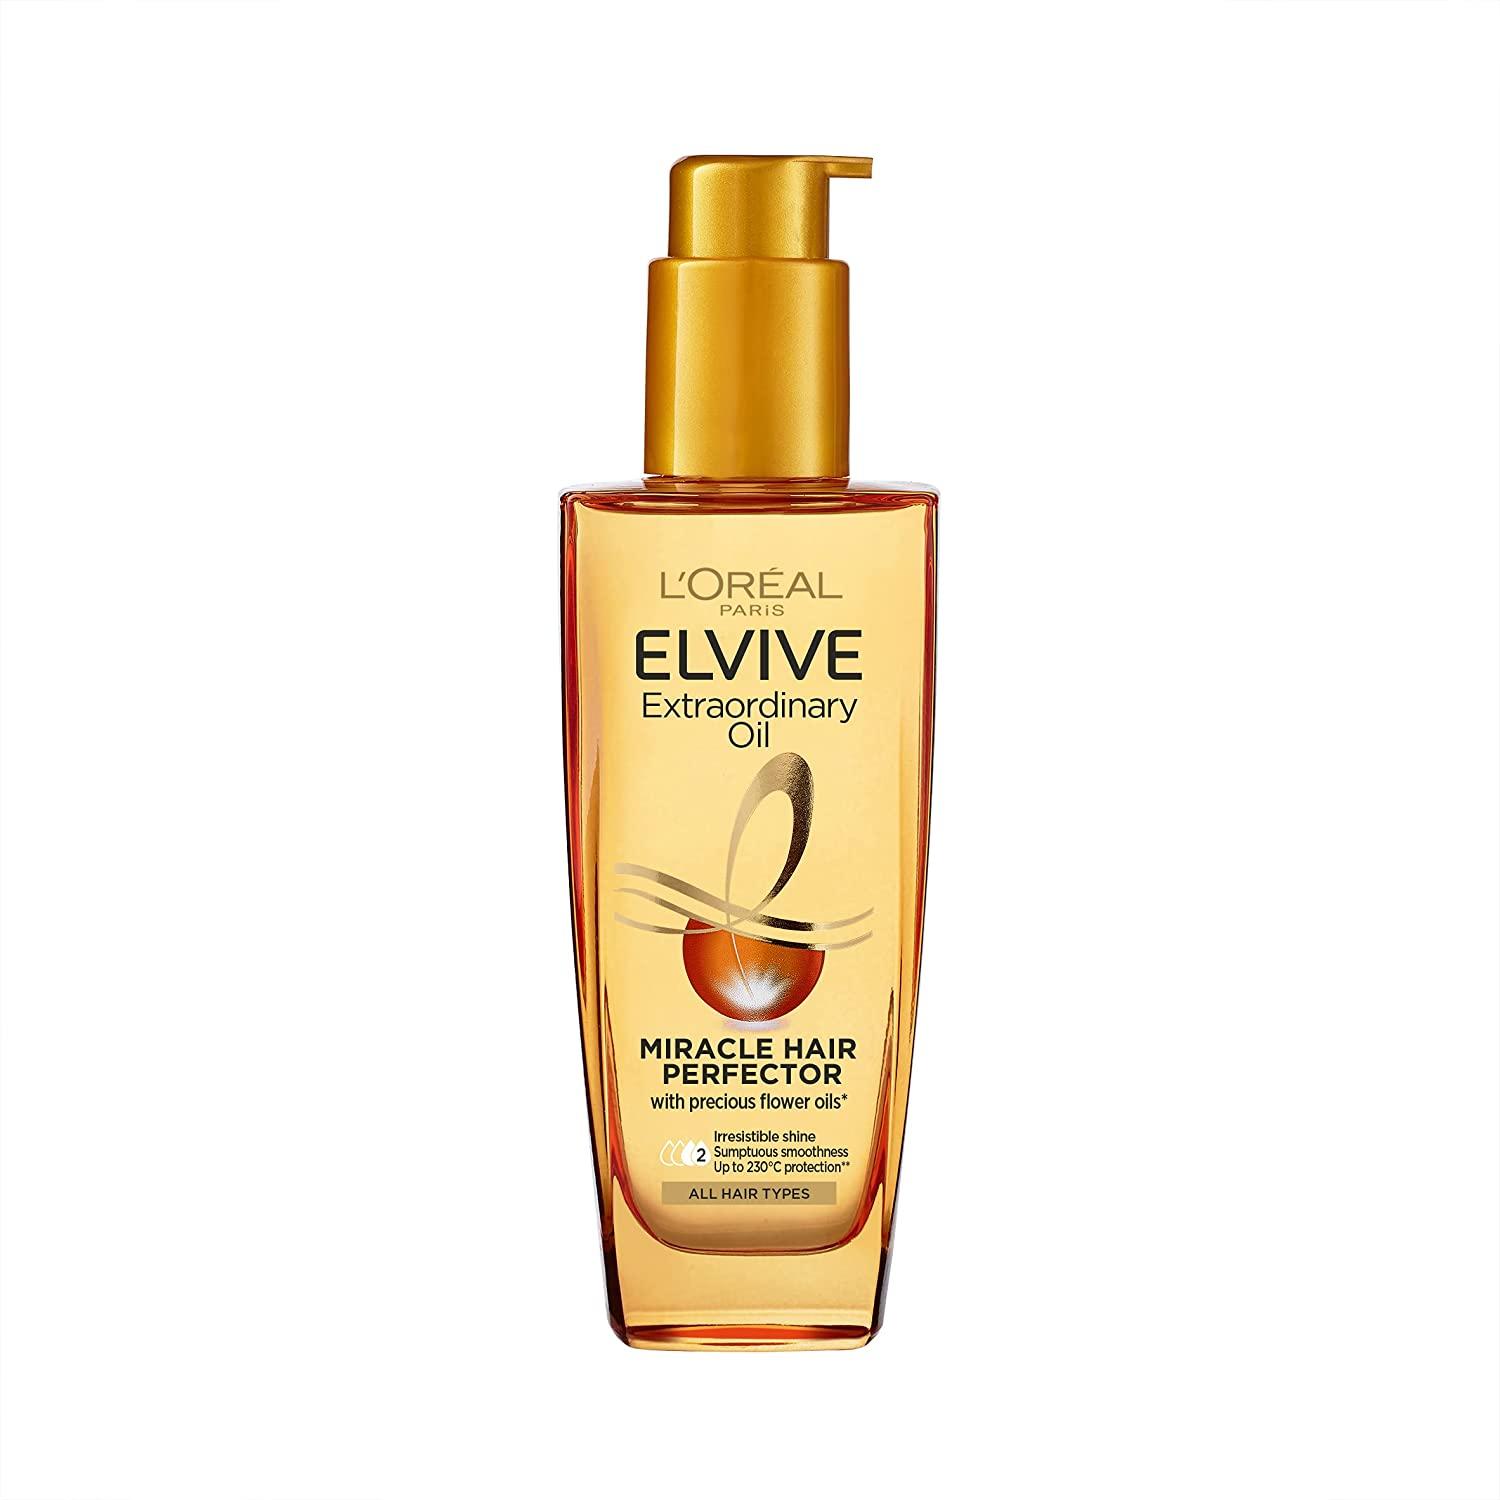 Elvive Extraordinary Oil Miracle Hair Perfector	